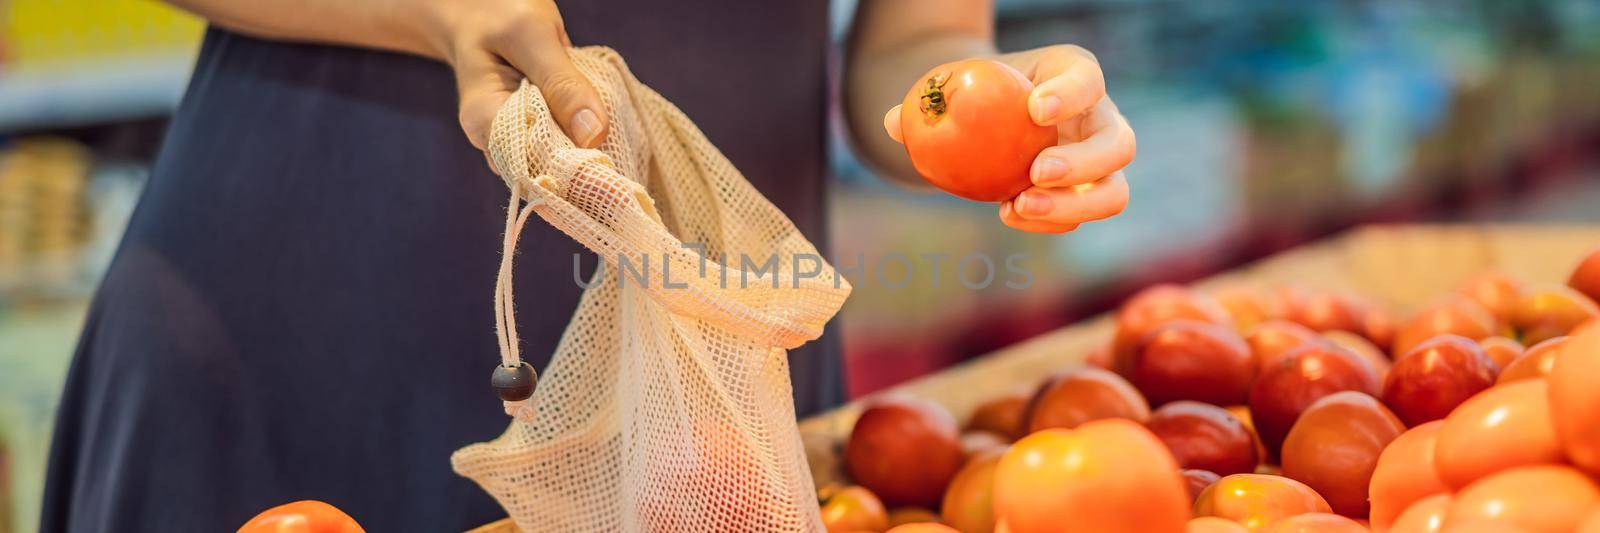 A woman chooses tomatoes in a supermarket without using a plastic bag. Reusable bag for buying vegetables. Zero waste concept. BANNER, LONG FORMAT